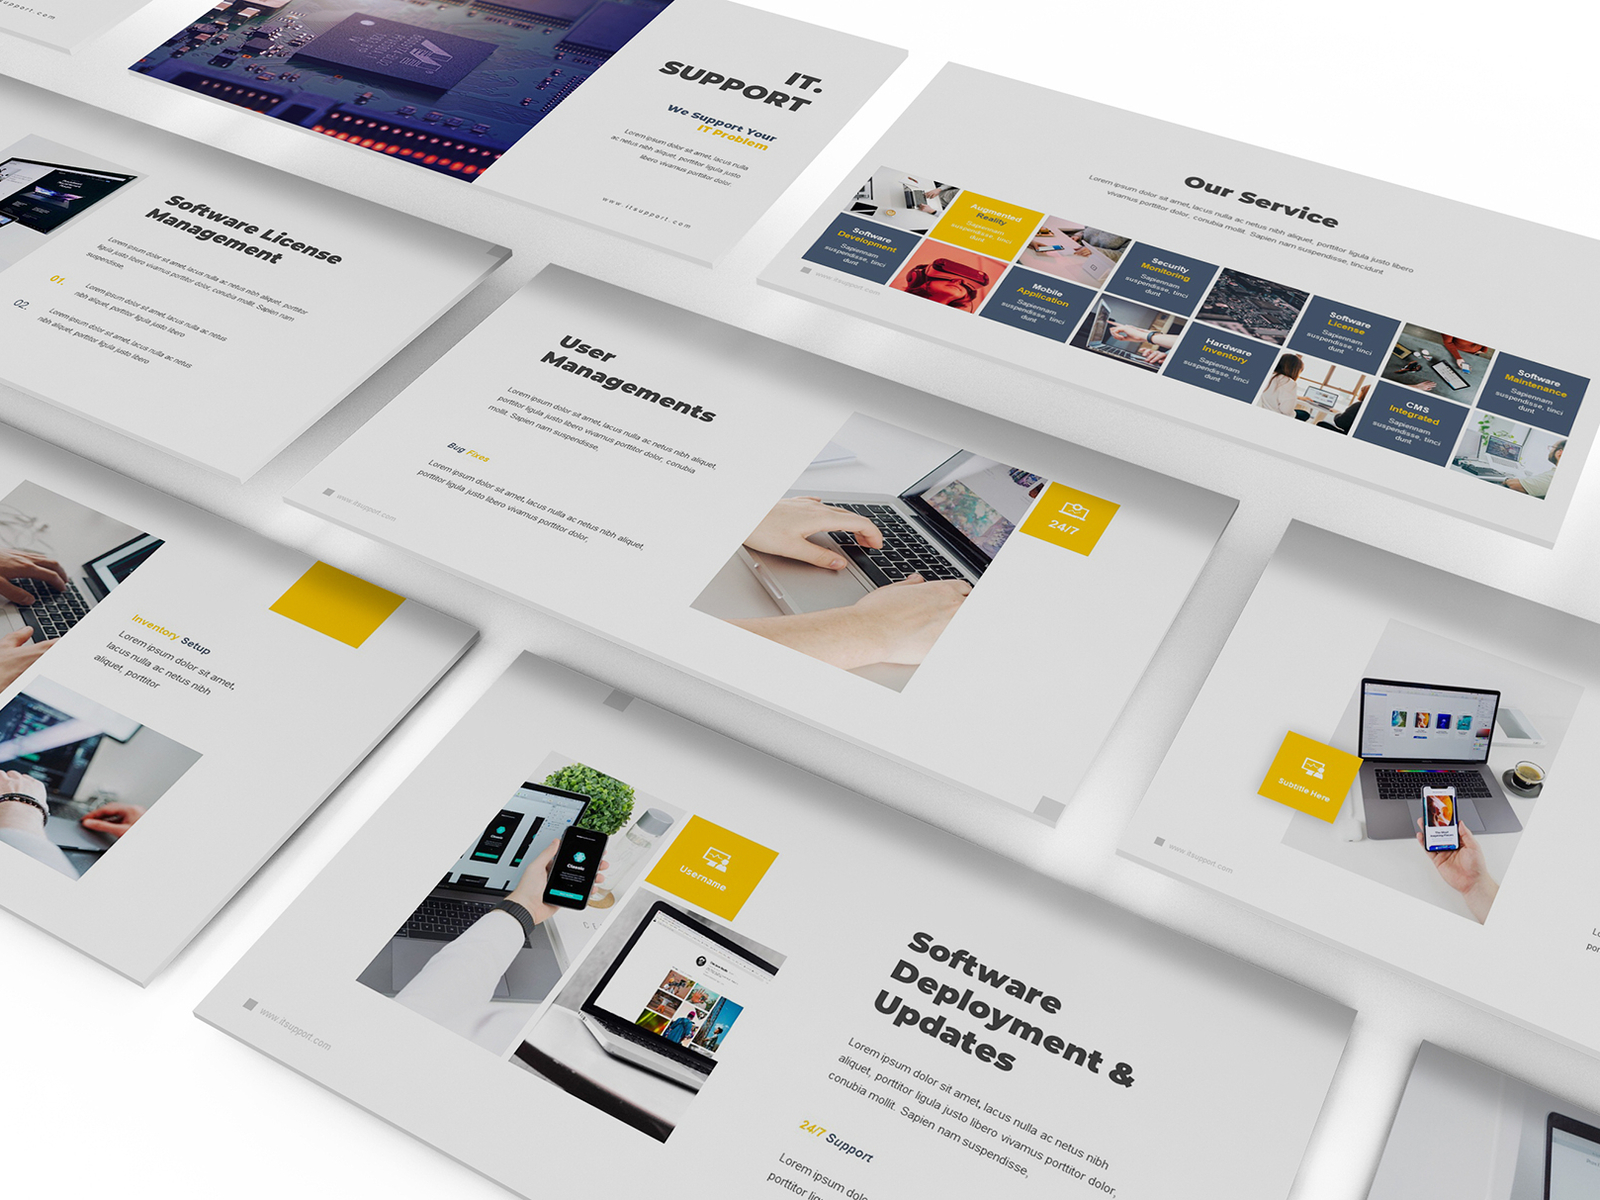 IT Support Keynote Template by Giant Design on Dribbble